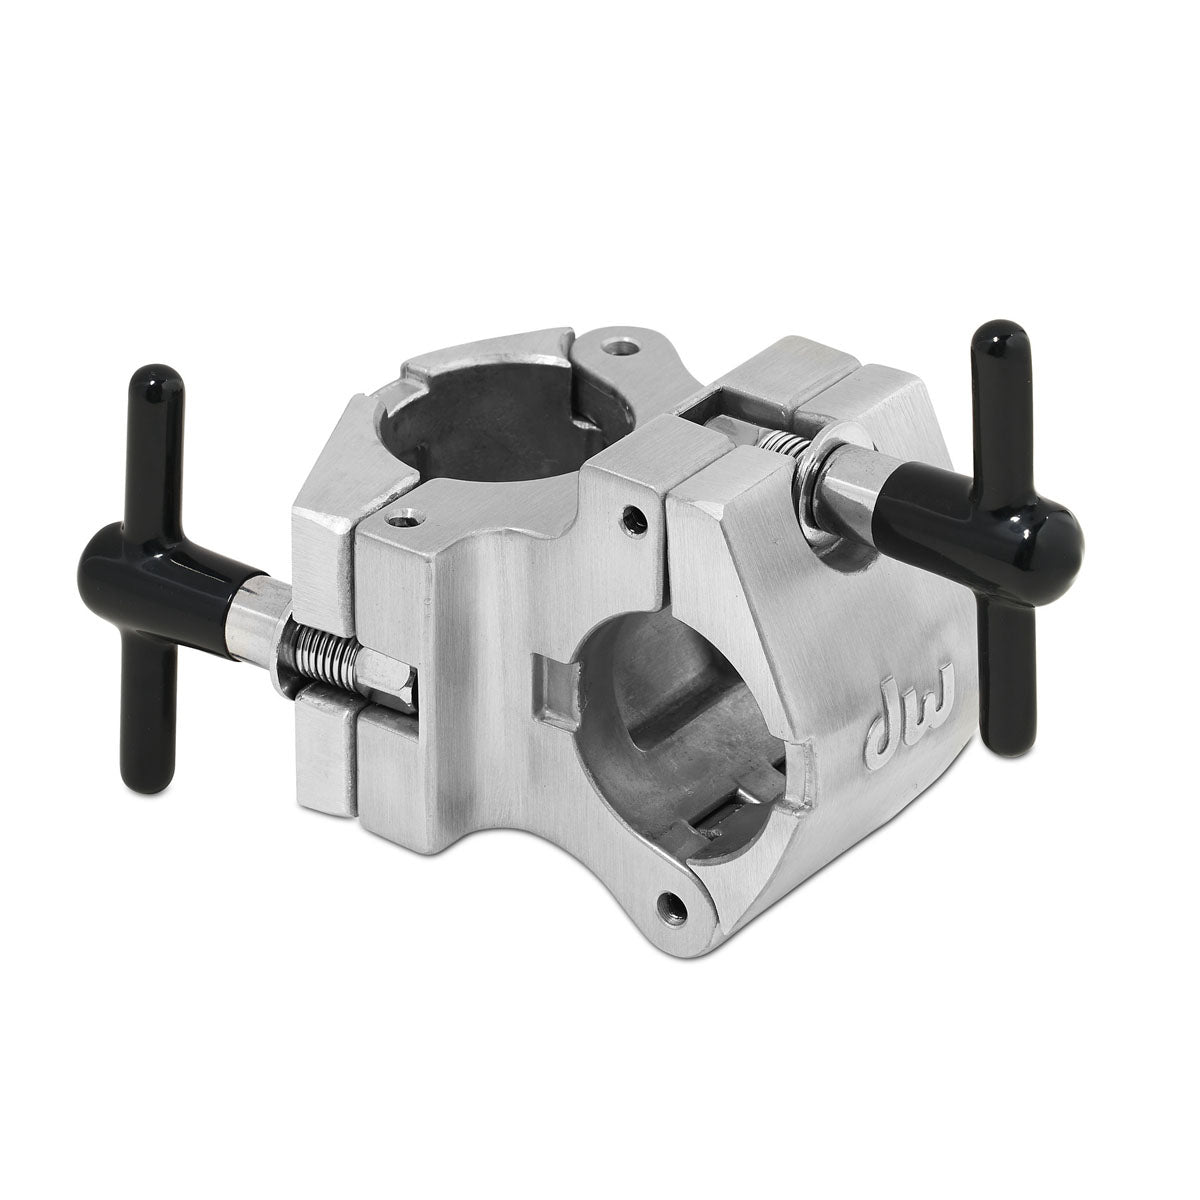 DW 9000 Rack Clamp - 1.5" to 1.5" Fixed 90° Angle Clamp